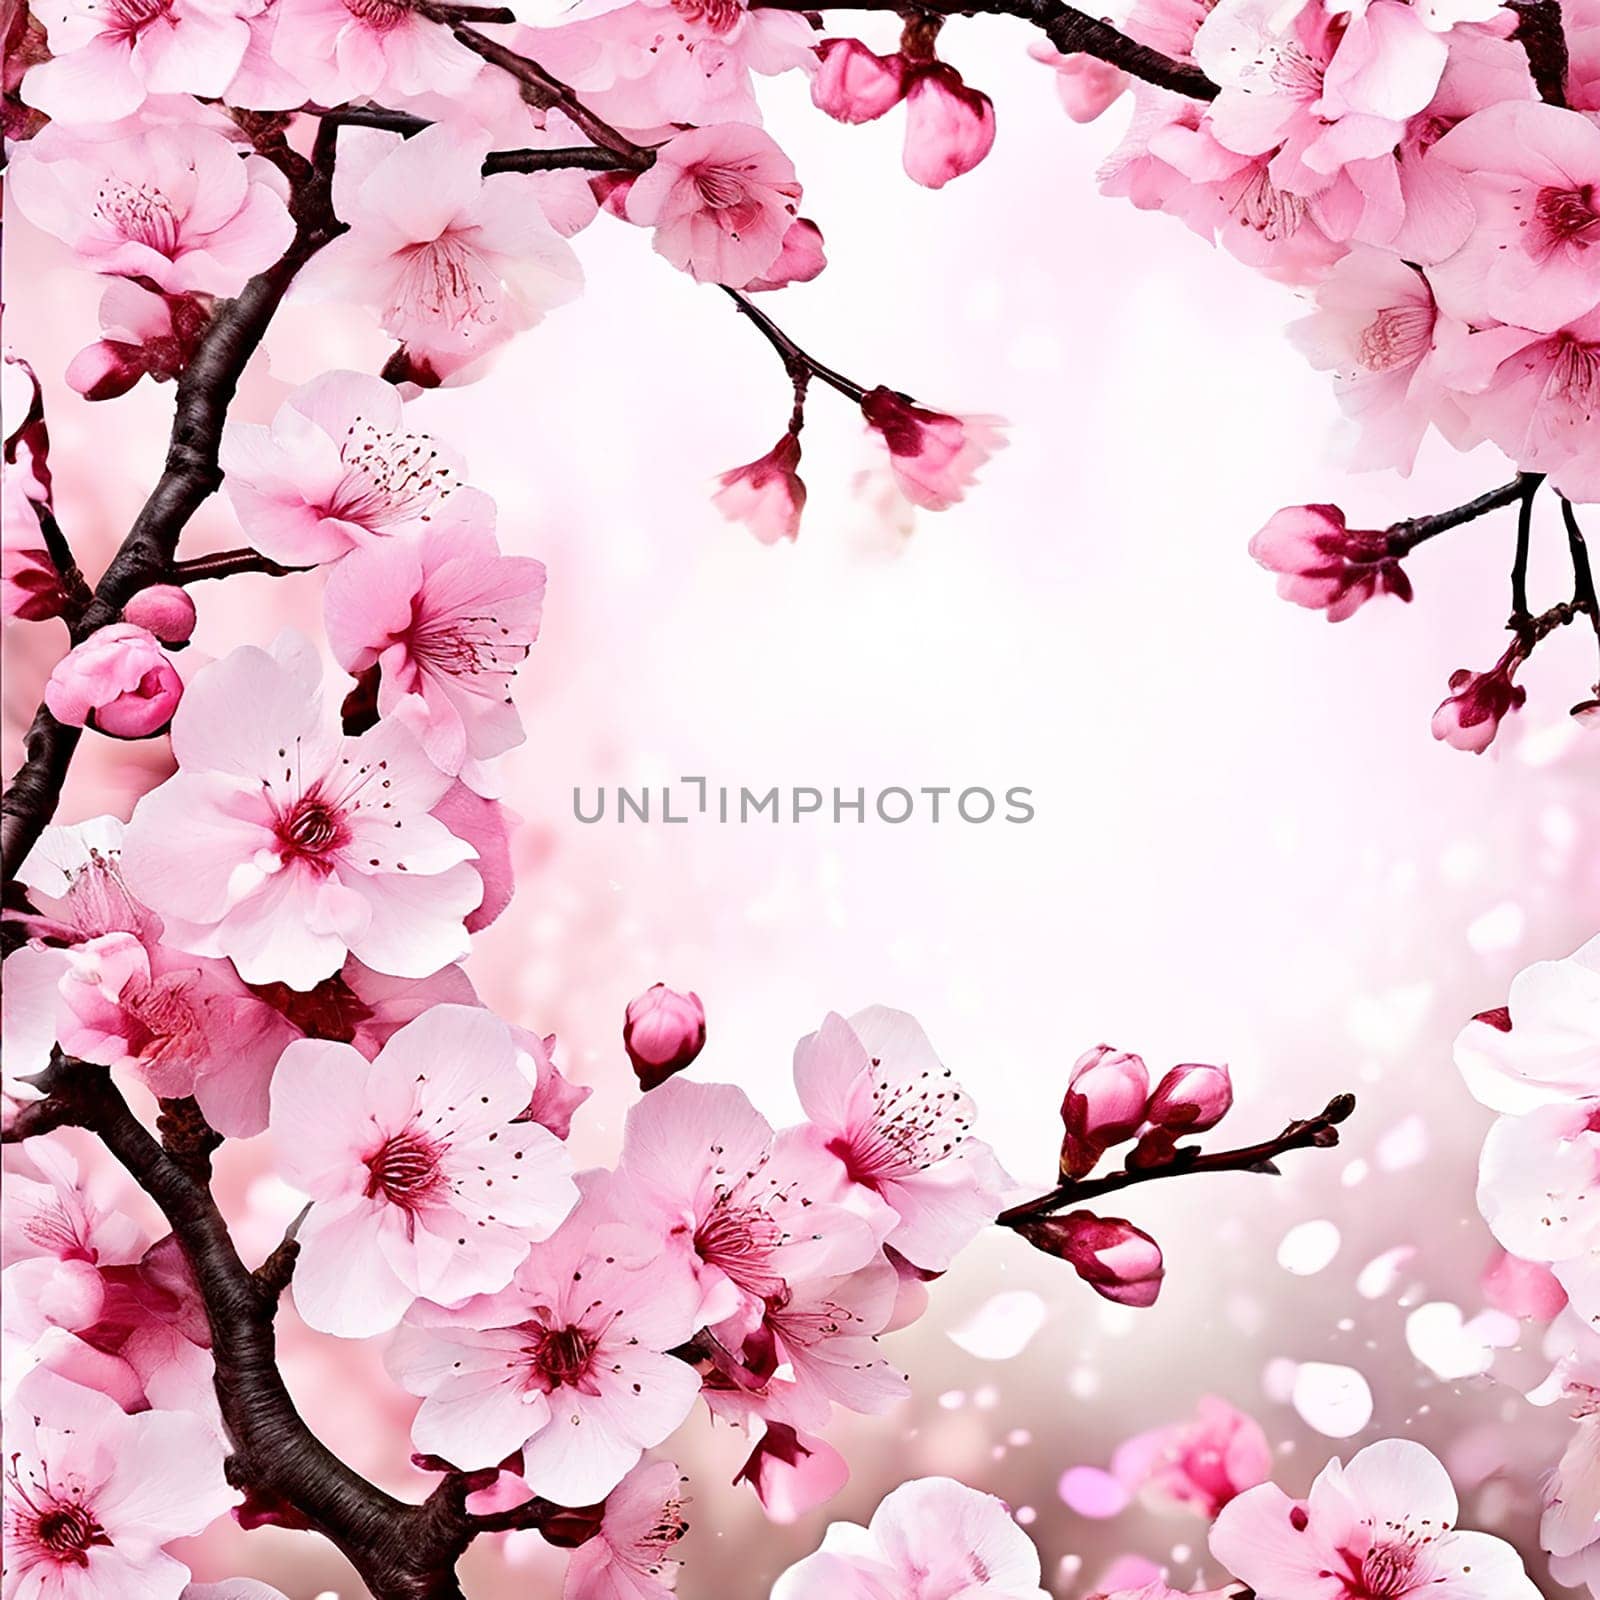 Blooming Beauty: Spring Banner with Sakura Blossom Background and Spring Flowers by Petrichor